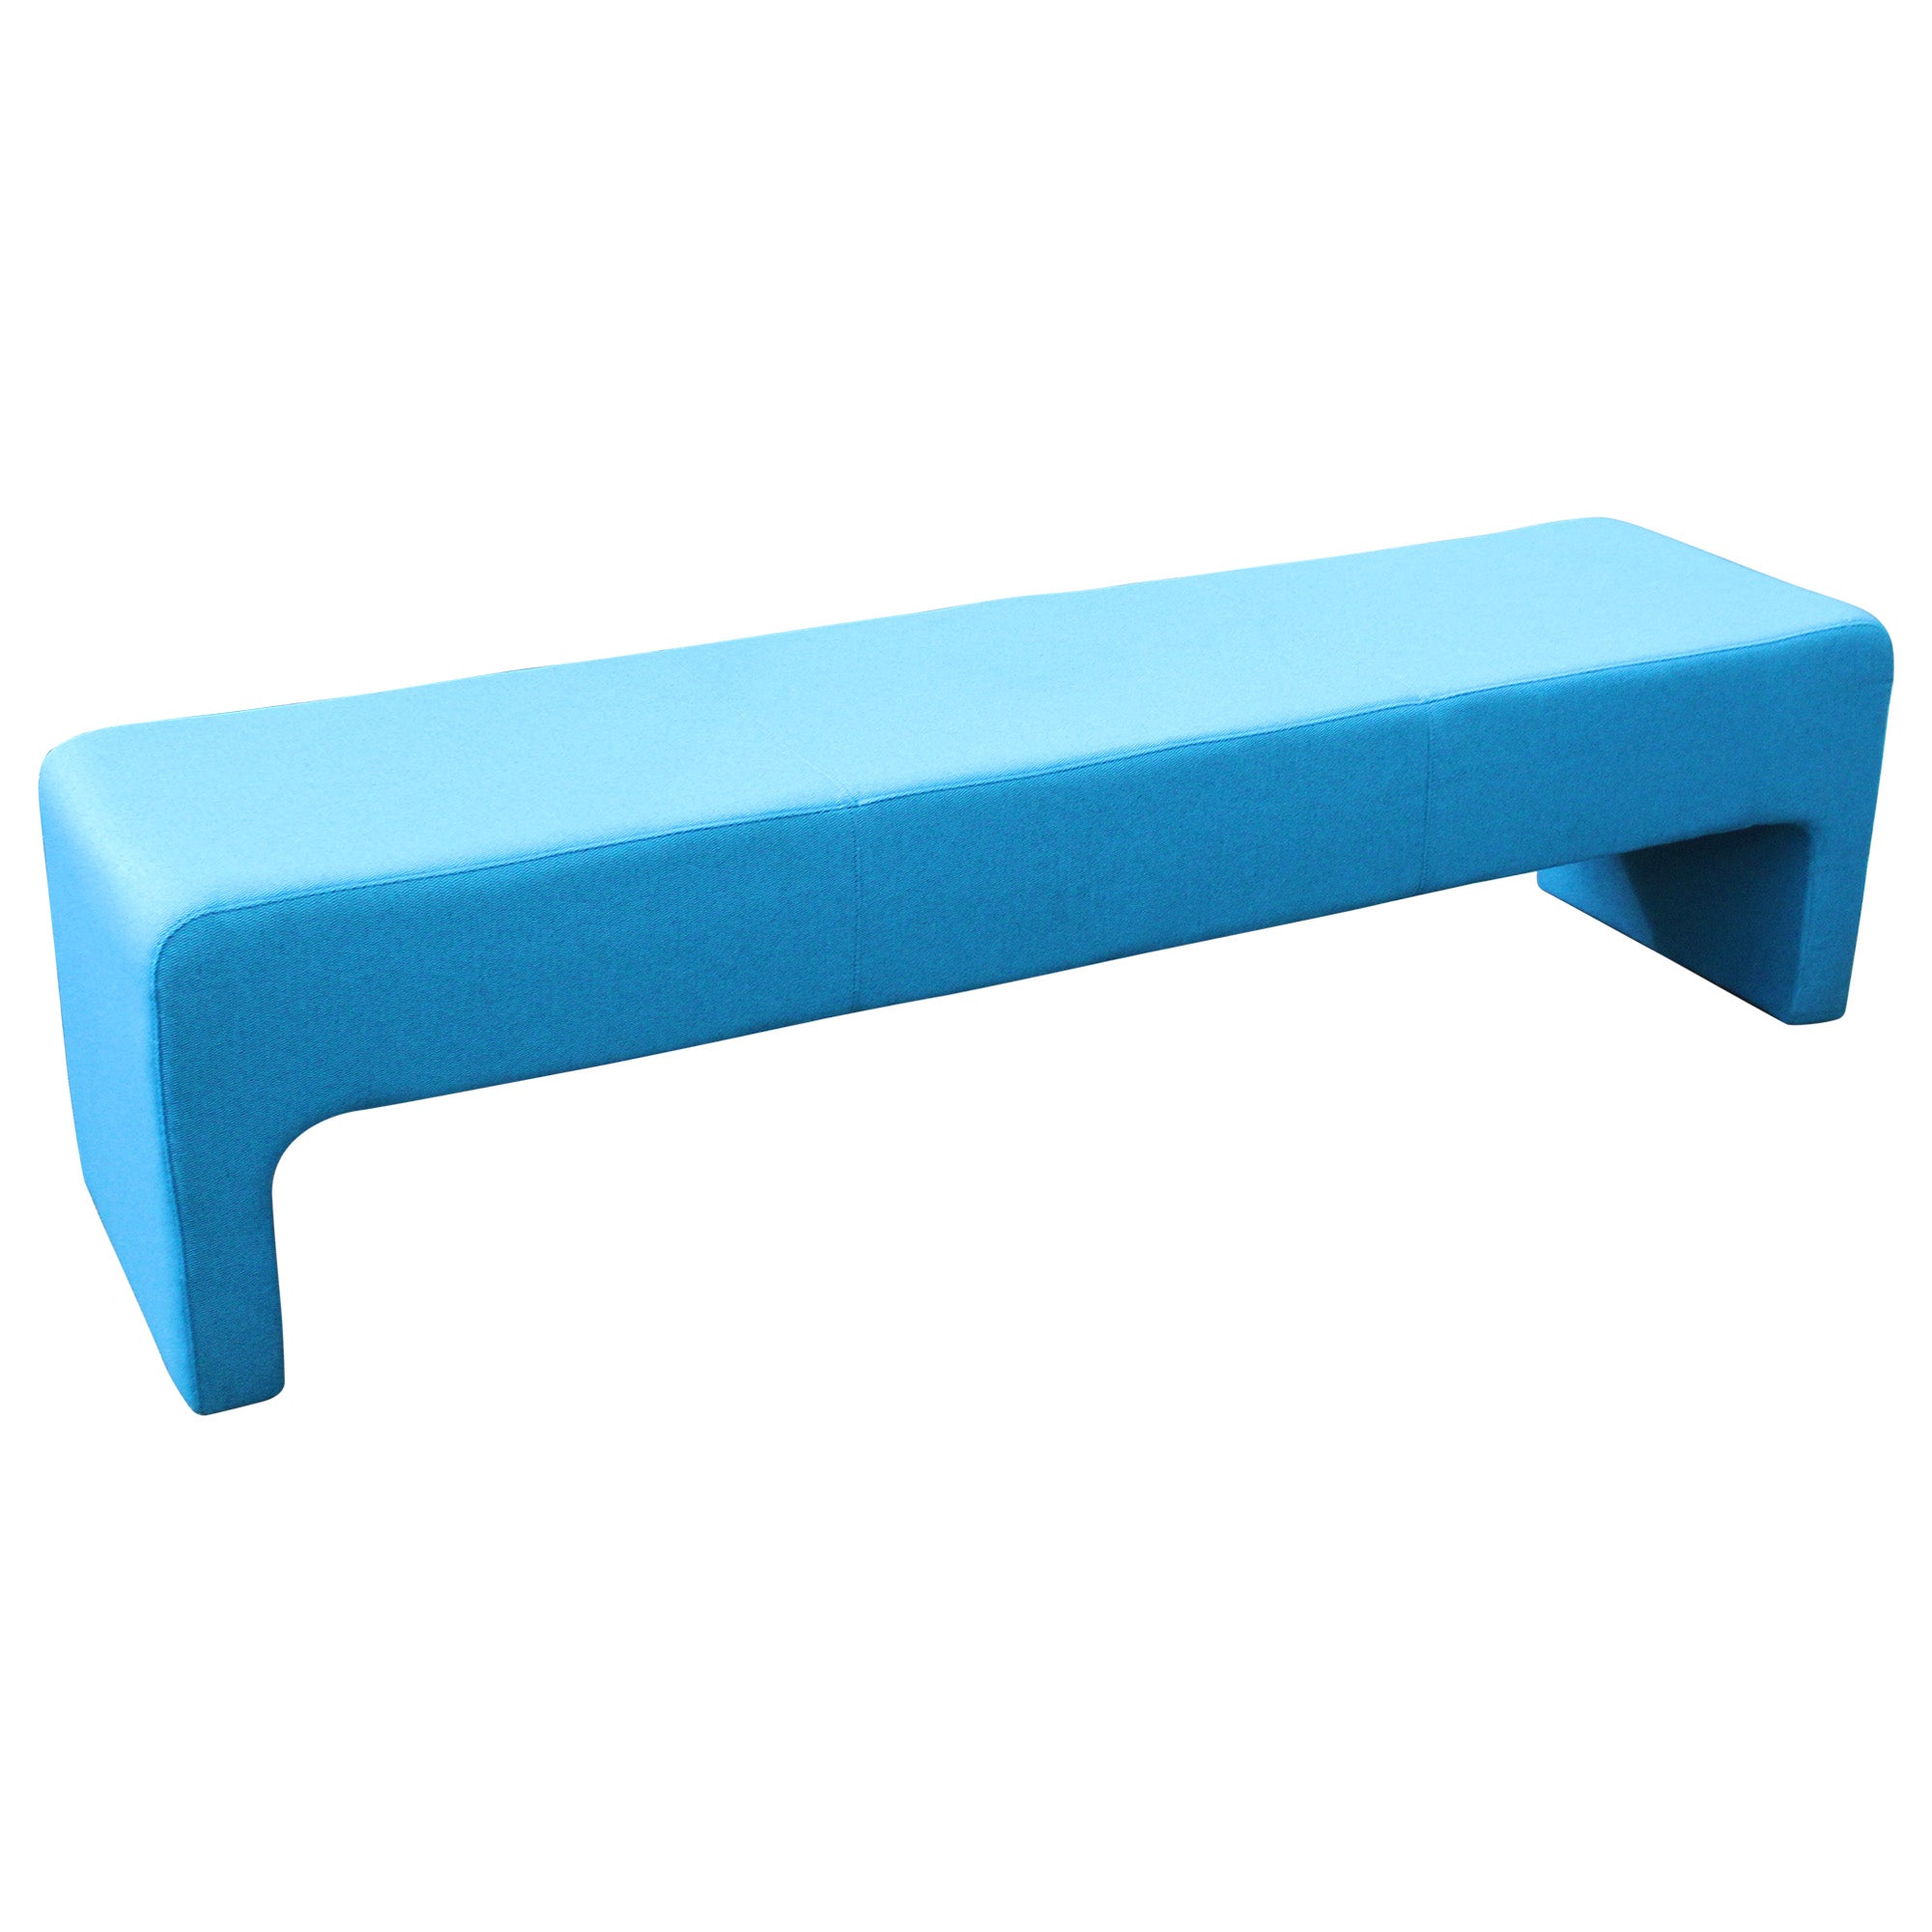 Upholstered Armless Bench -  Blue - Preowned